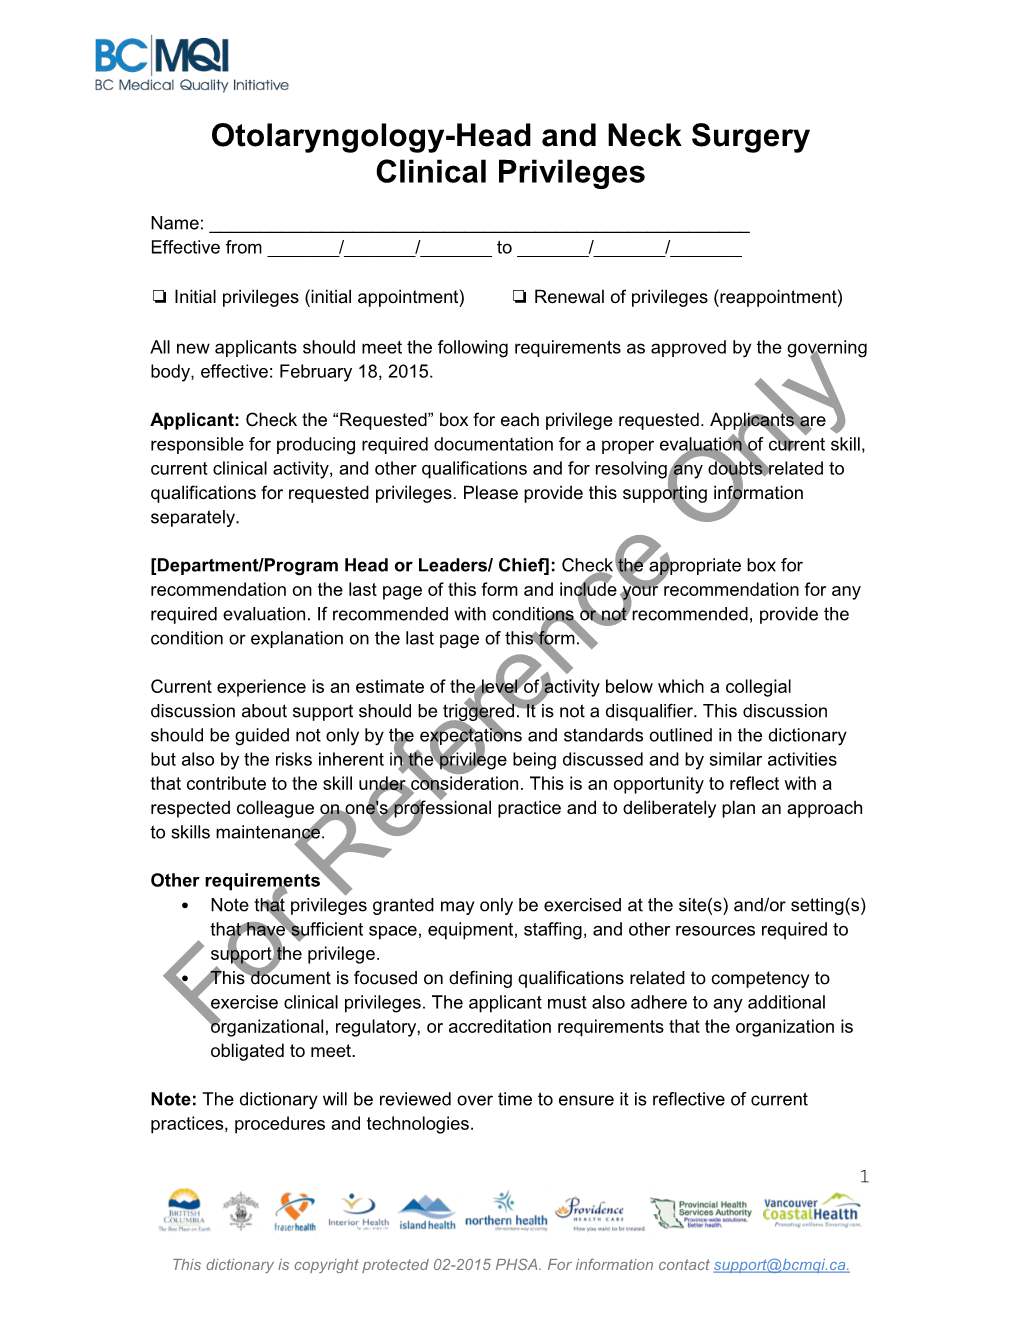 Otolaryngology-Head and Neck Surgery Clinical Privileges